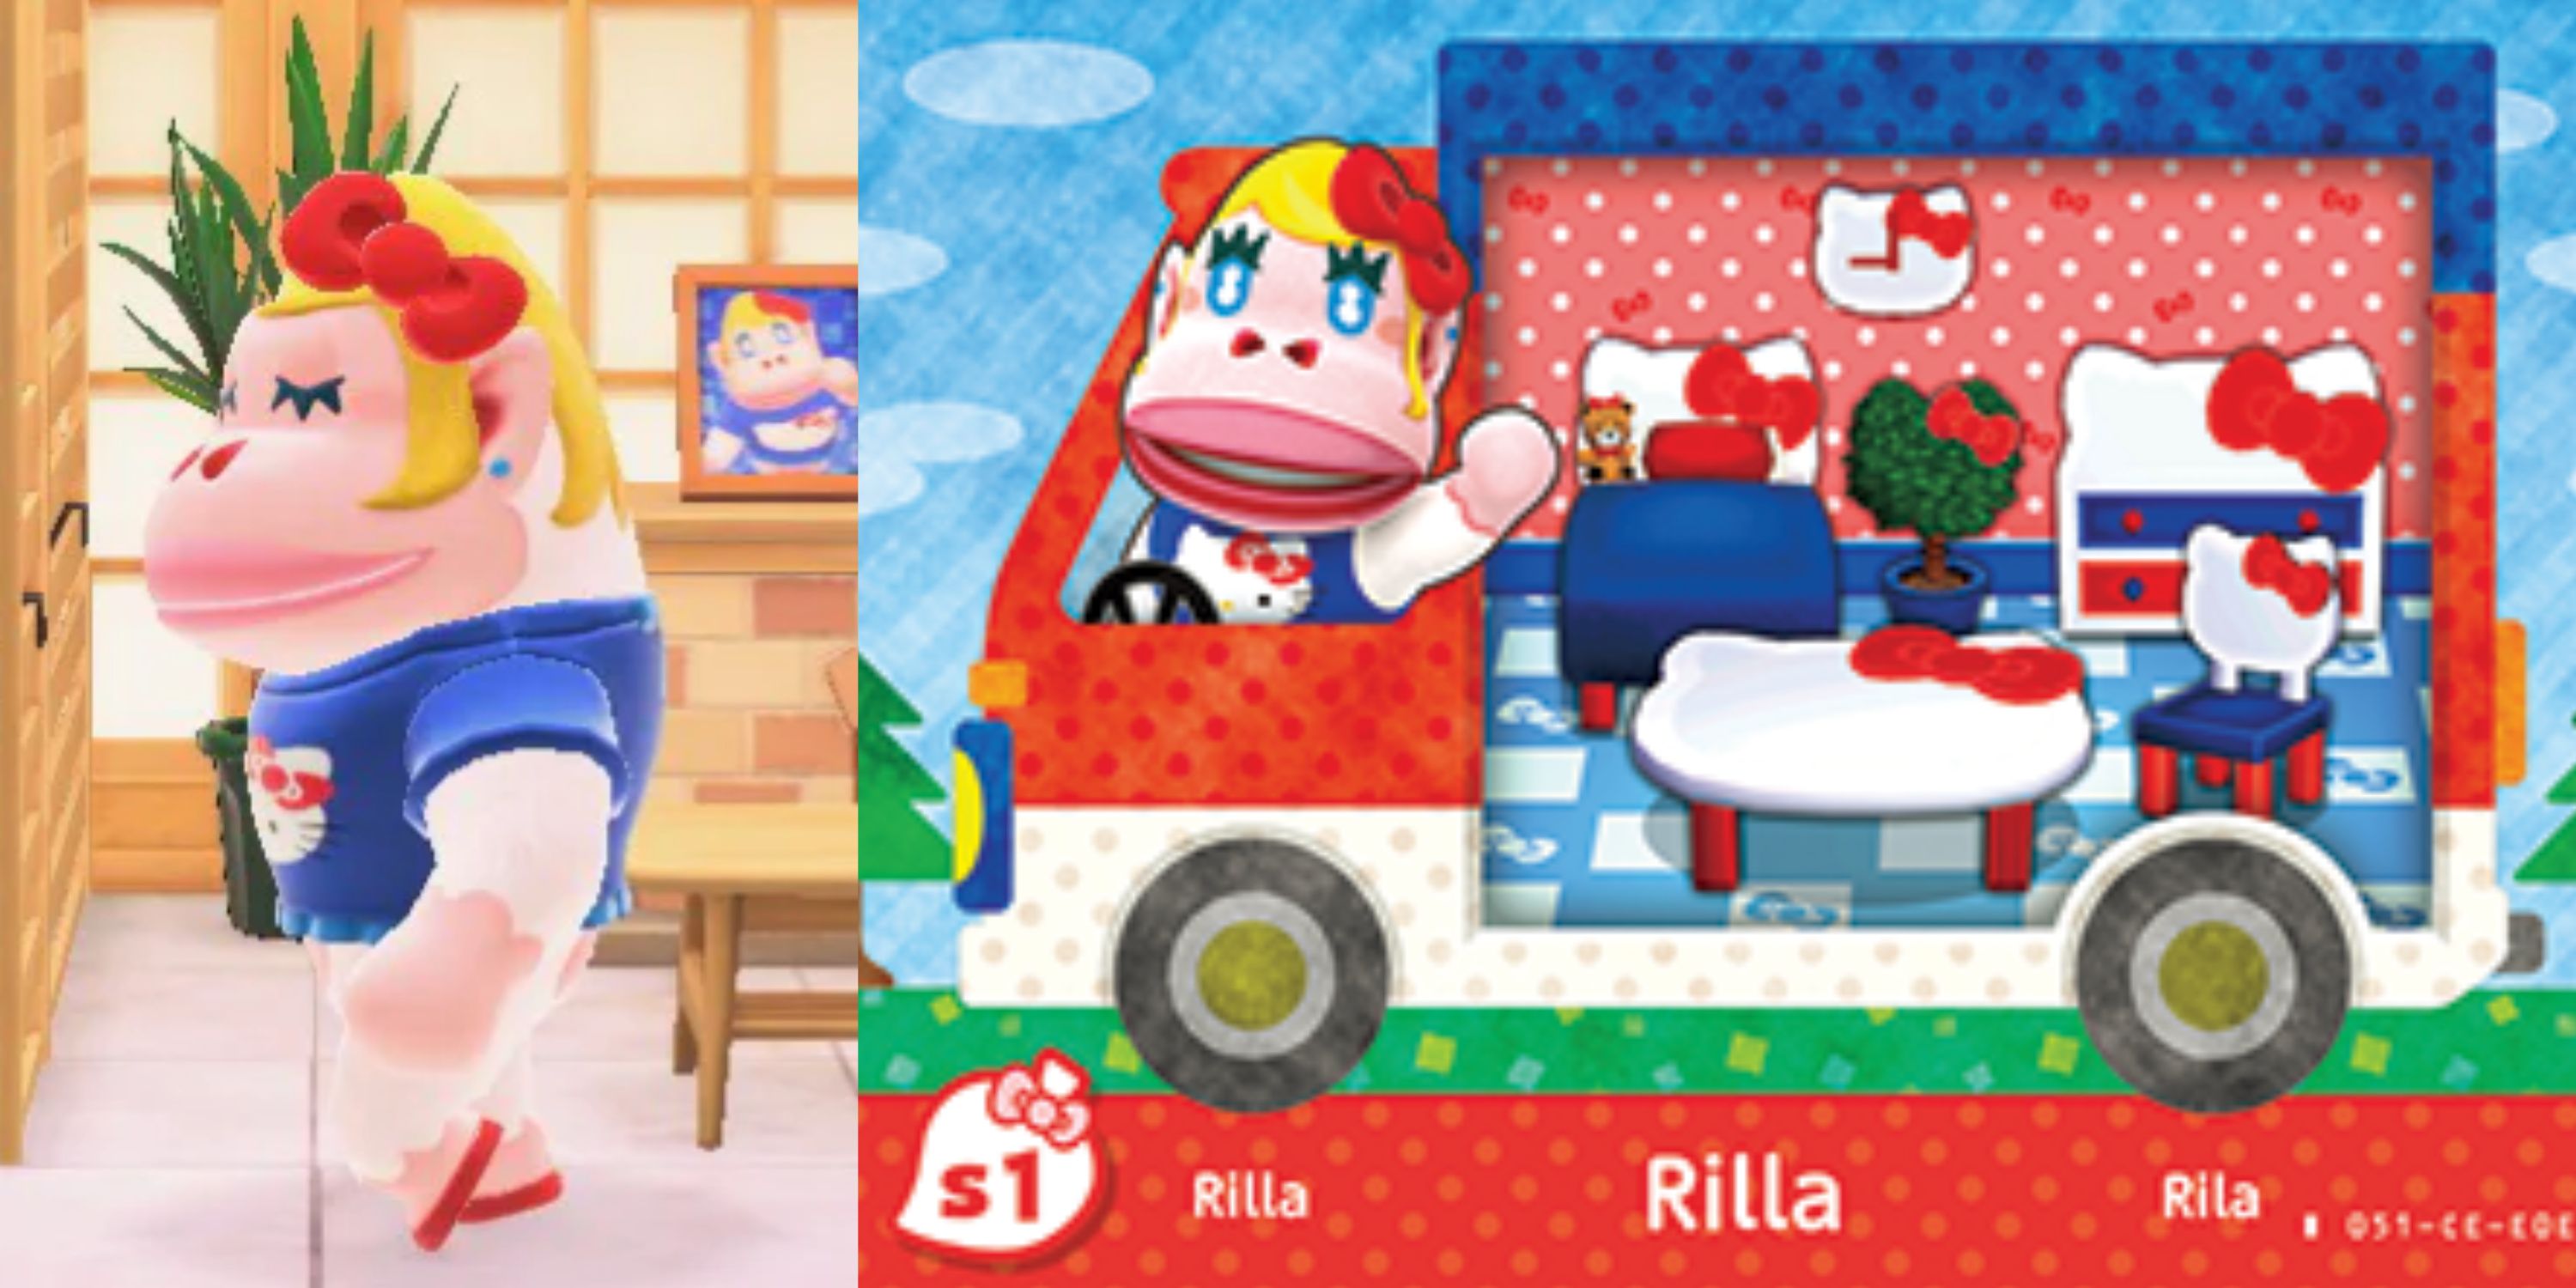 Part of the Sanrio collab, Rilla is a Hello Kitty inspired Gorilla villager